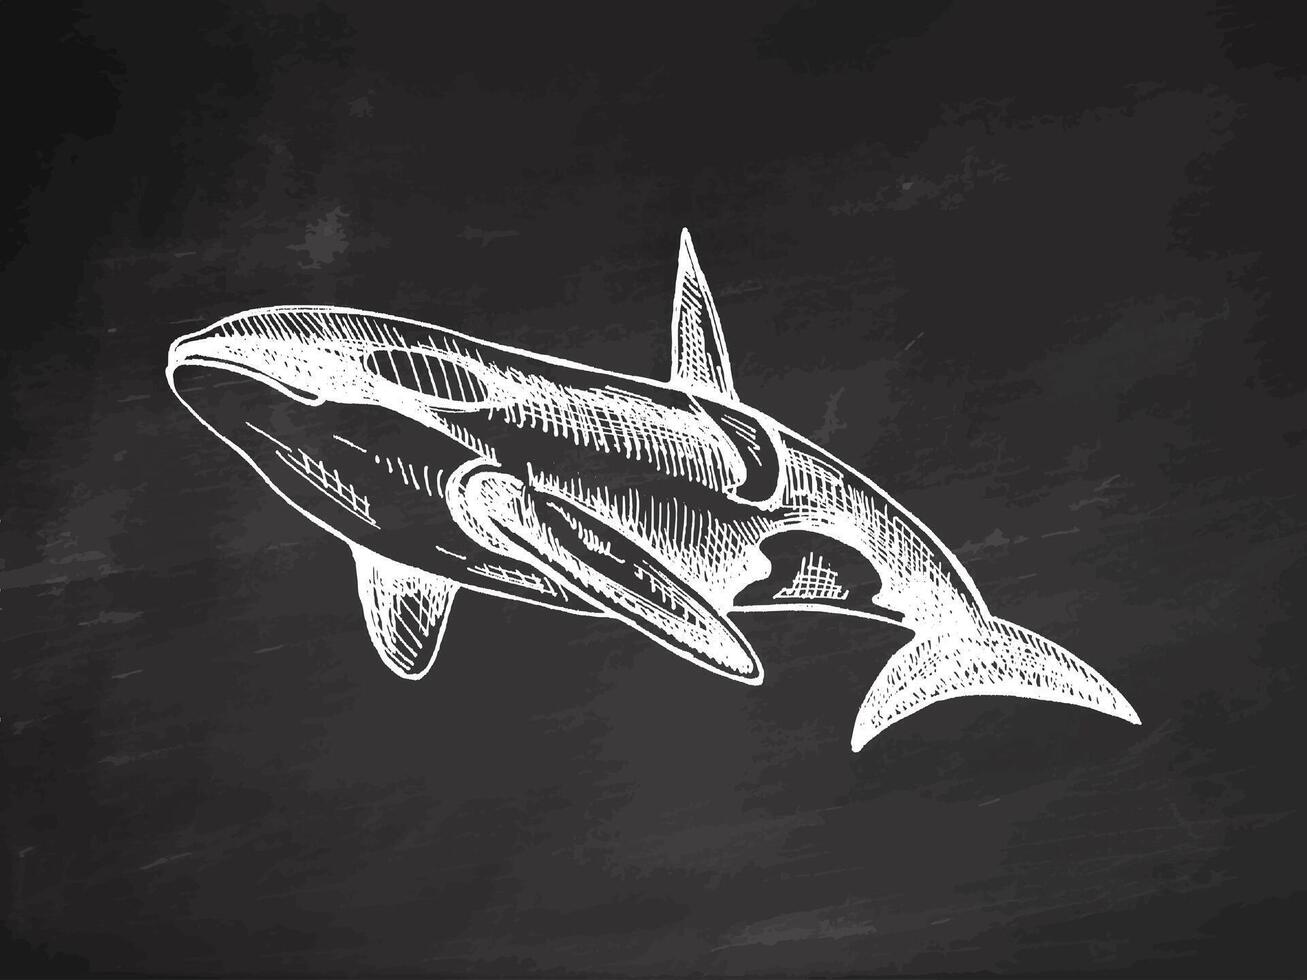 Hand-drawn killer whale. Vector sketch illustration on chalkboard background. Sea collection. Engraved illustrations. Realistic sketches.